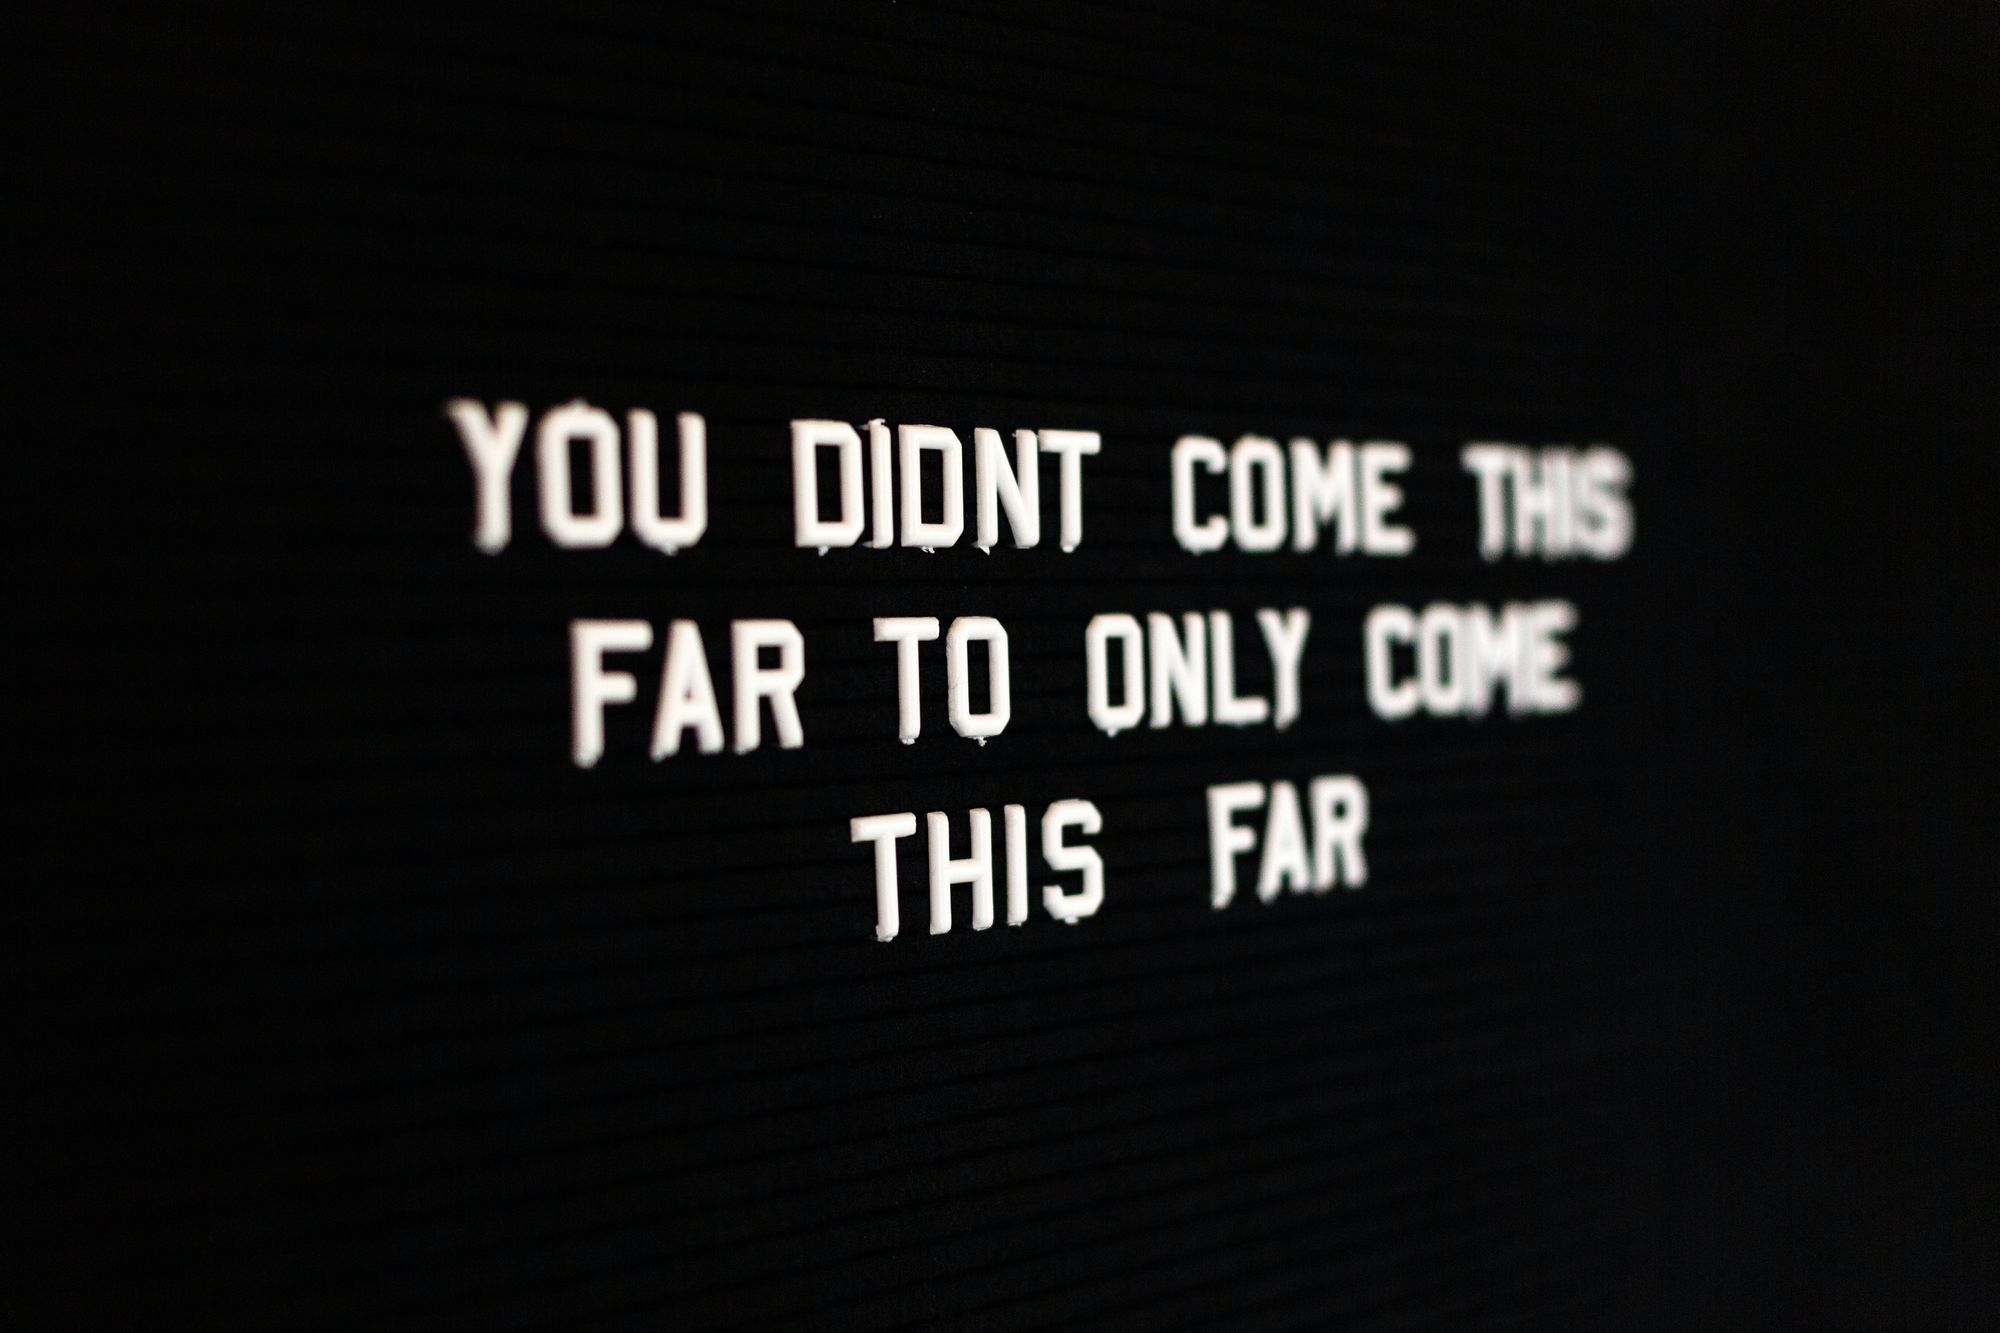 Text: You didn't come this far to only come this far